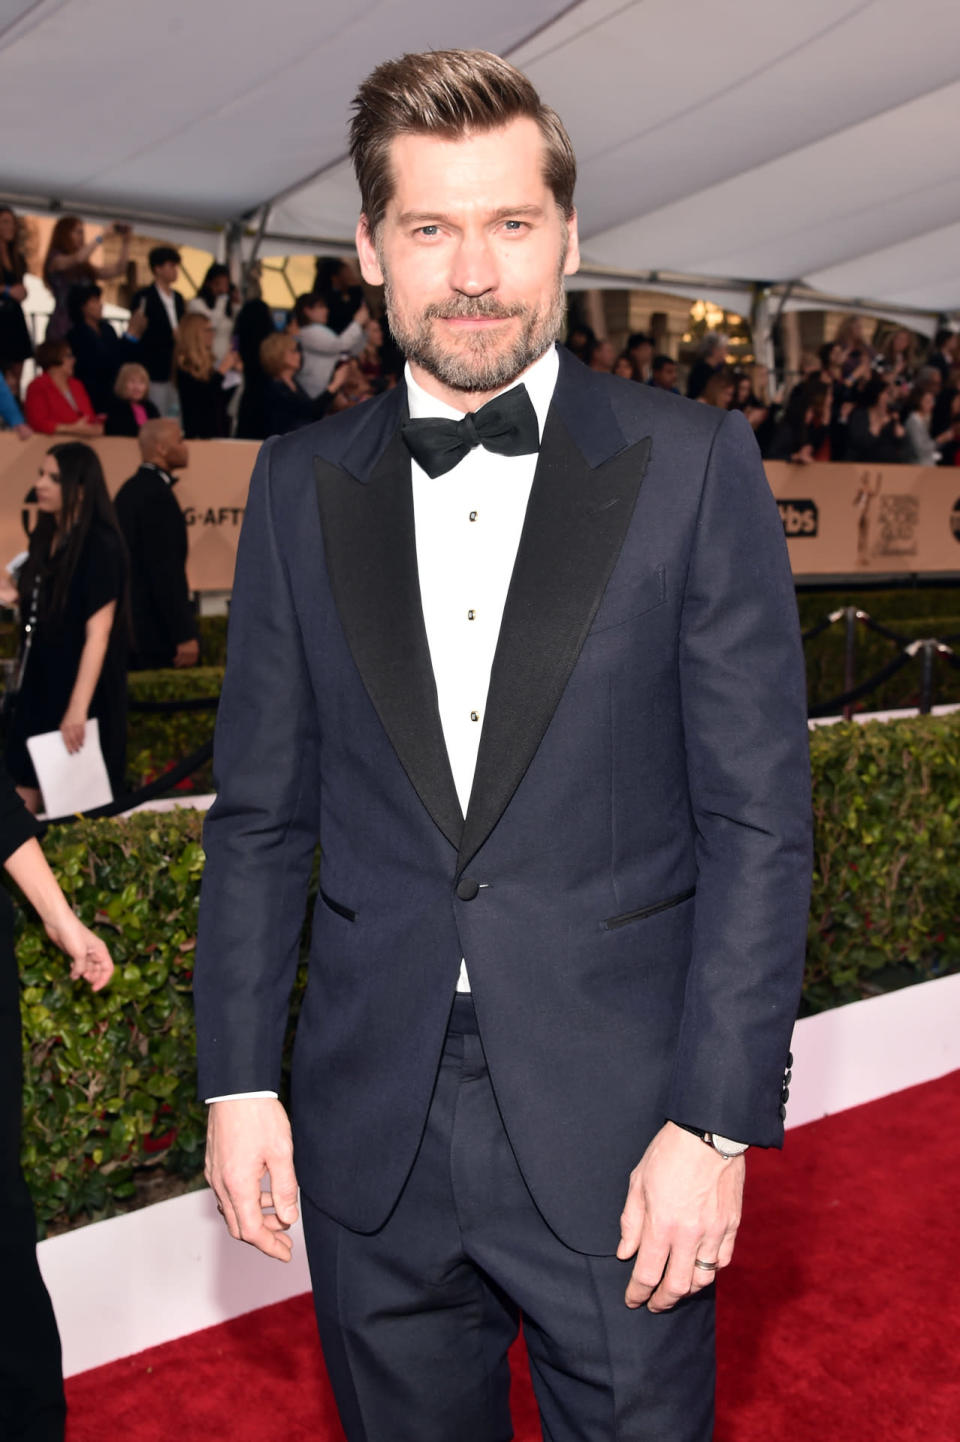 Nikolaj Coster-Waldau in a navy blue Dunhill London tuxedo with black lapels at the 22nd Annual Screen Actors Guild Awards at The Shrine Auditorium on January 30, 2016 in Los Angeles, California.